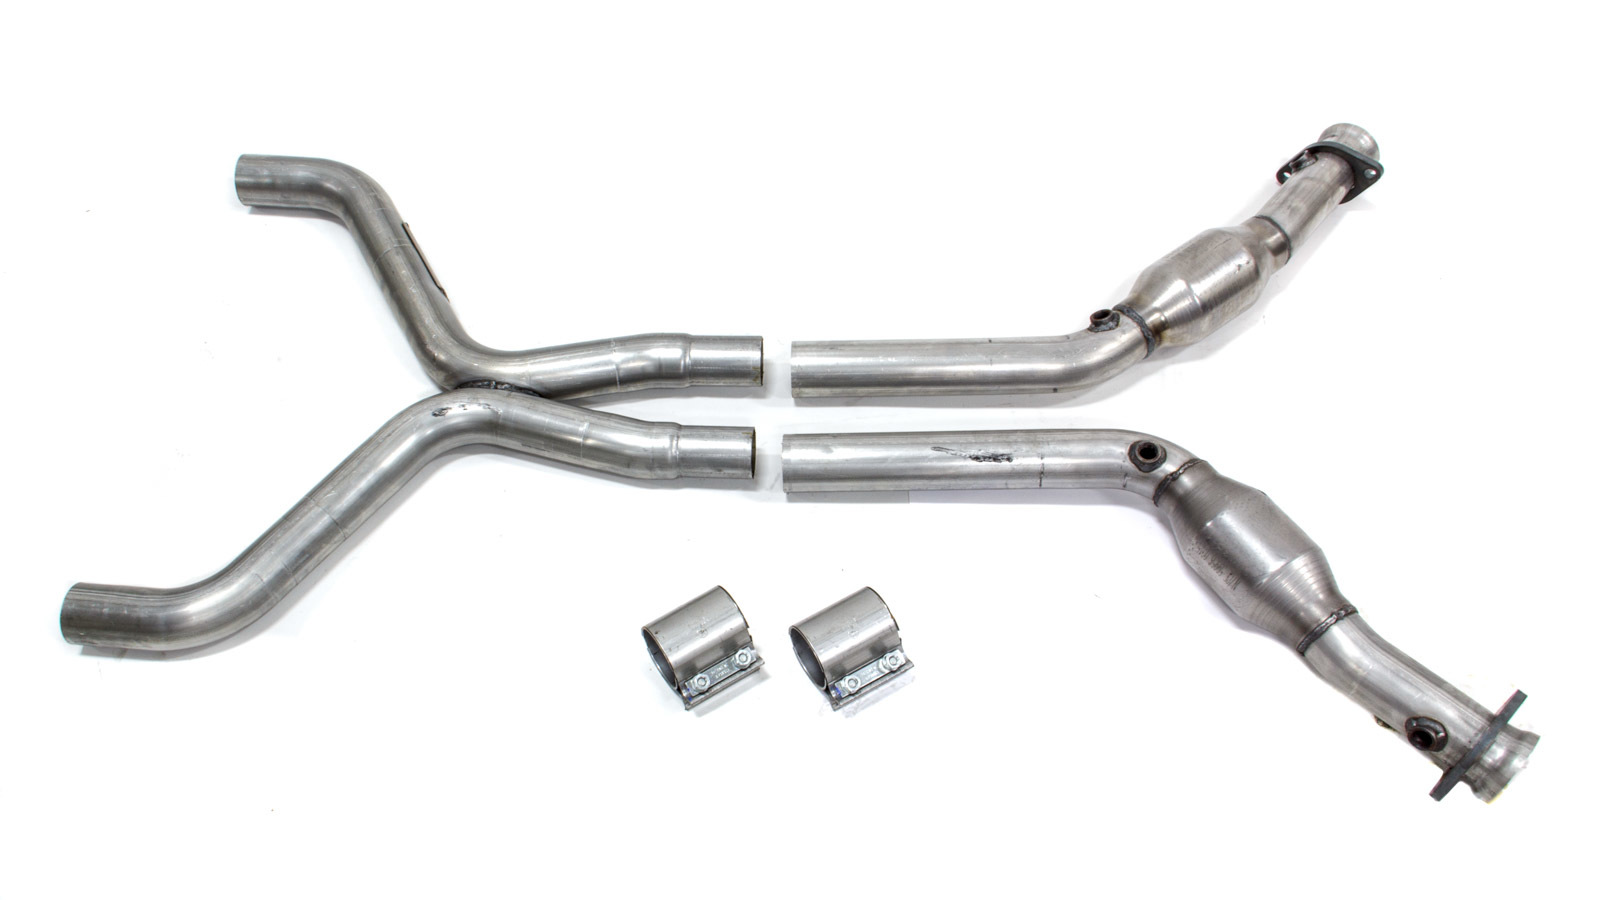 BBK Performance 1814 Exhaust X-Pipe, High-Flow, Catted, 2-1/2 in Diameter, Steel, Aluminized, Ford V6, Ford Mustang 2011-14, Each